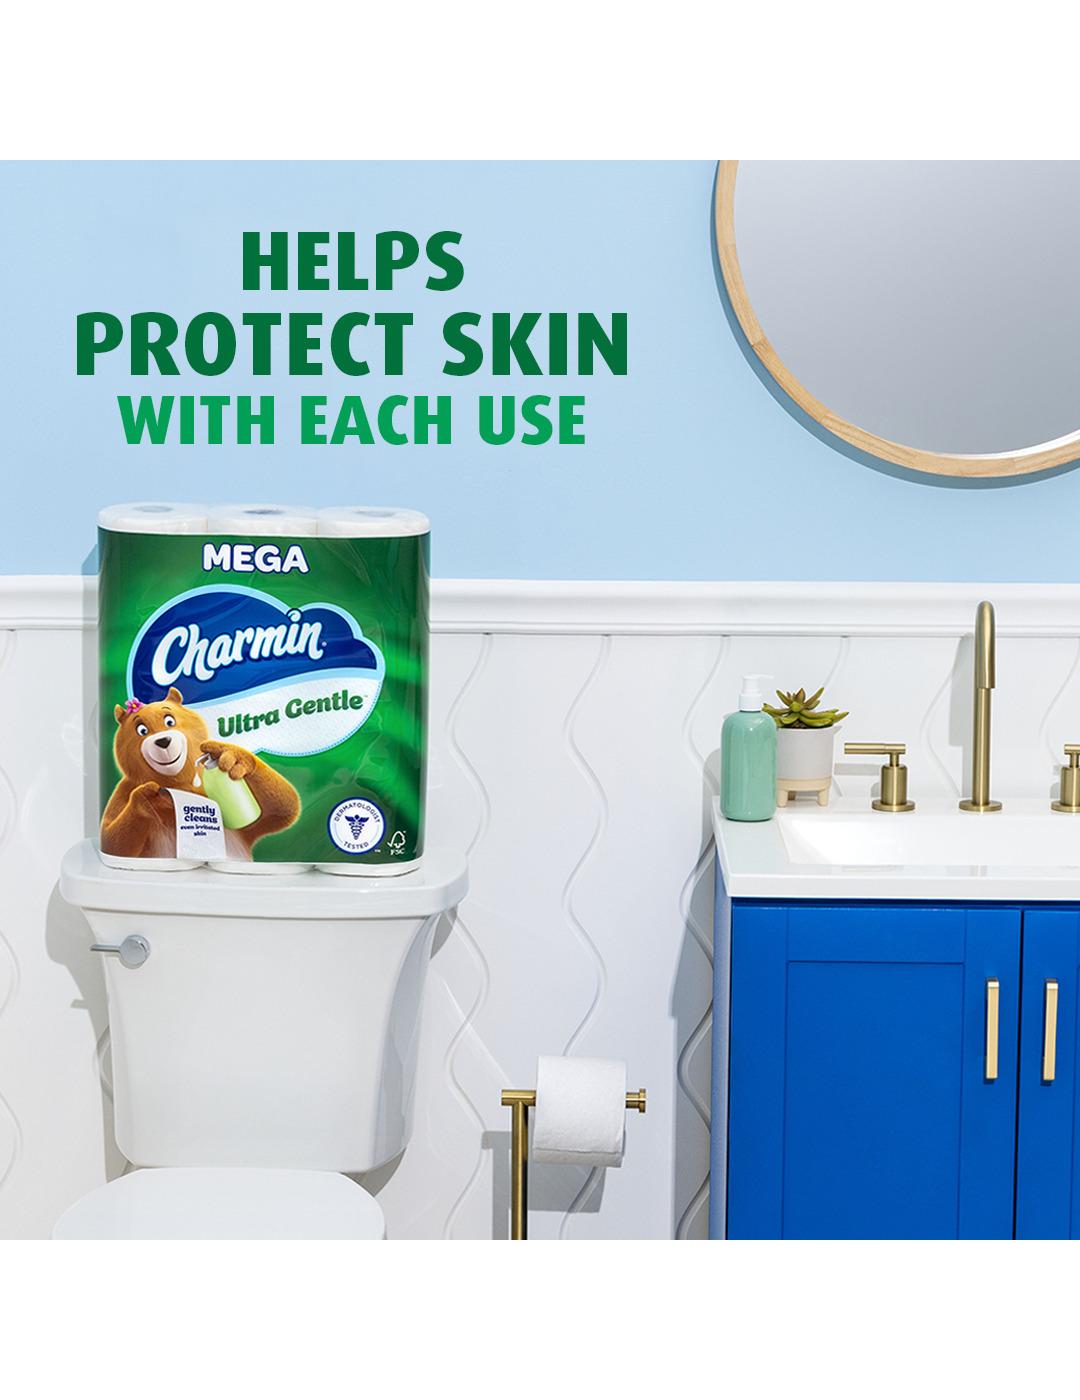 Charmin Ultra Gentle Toilet Paper; image 2 of 6